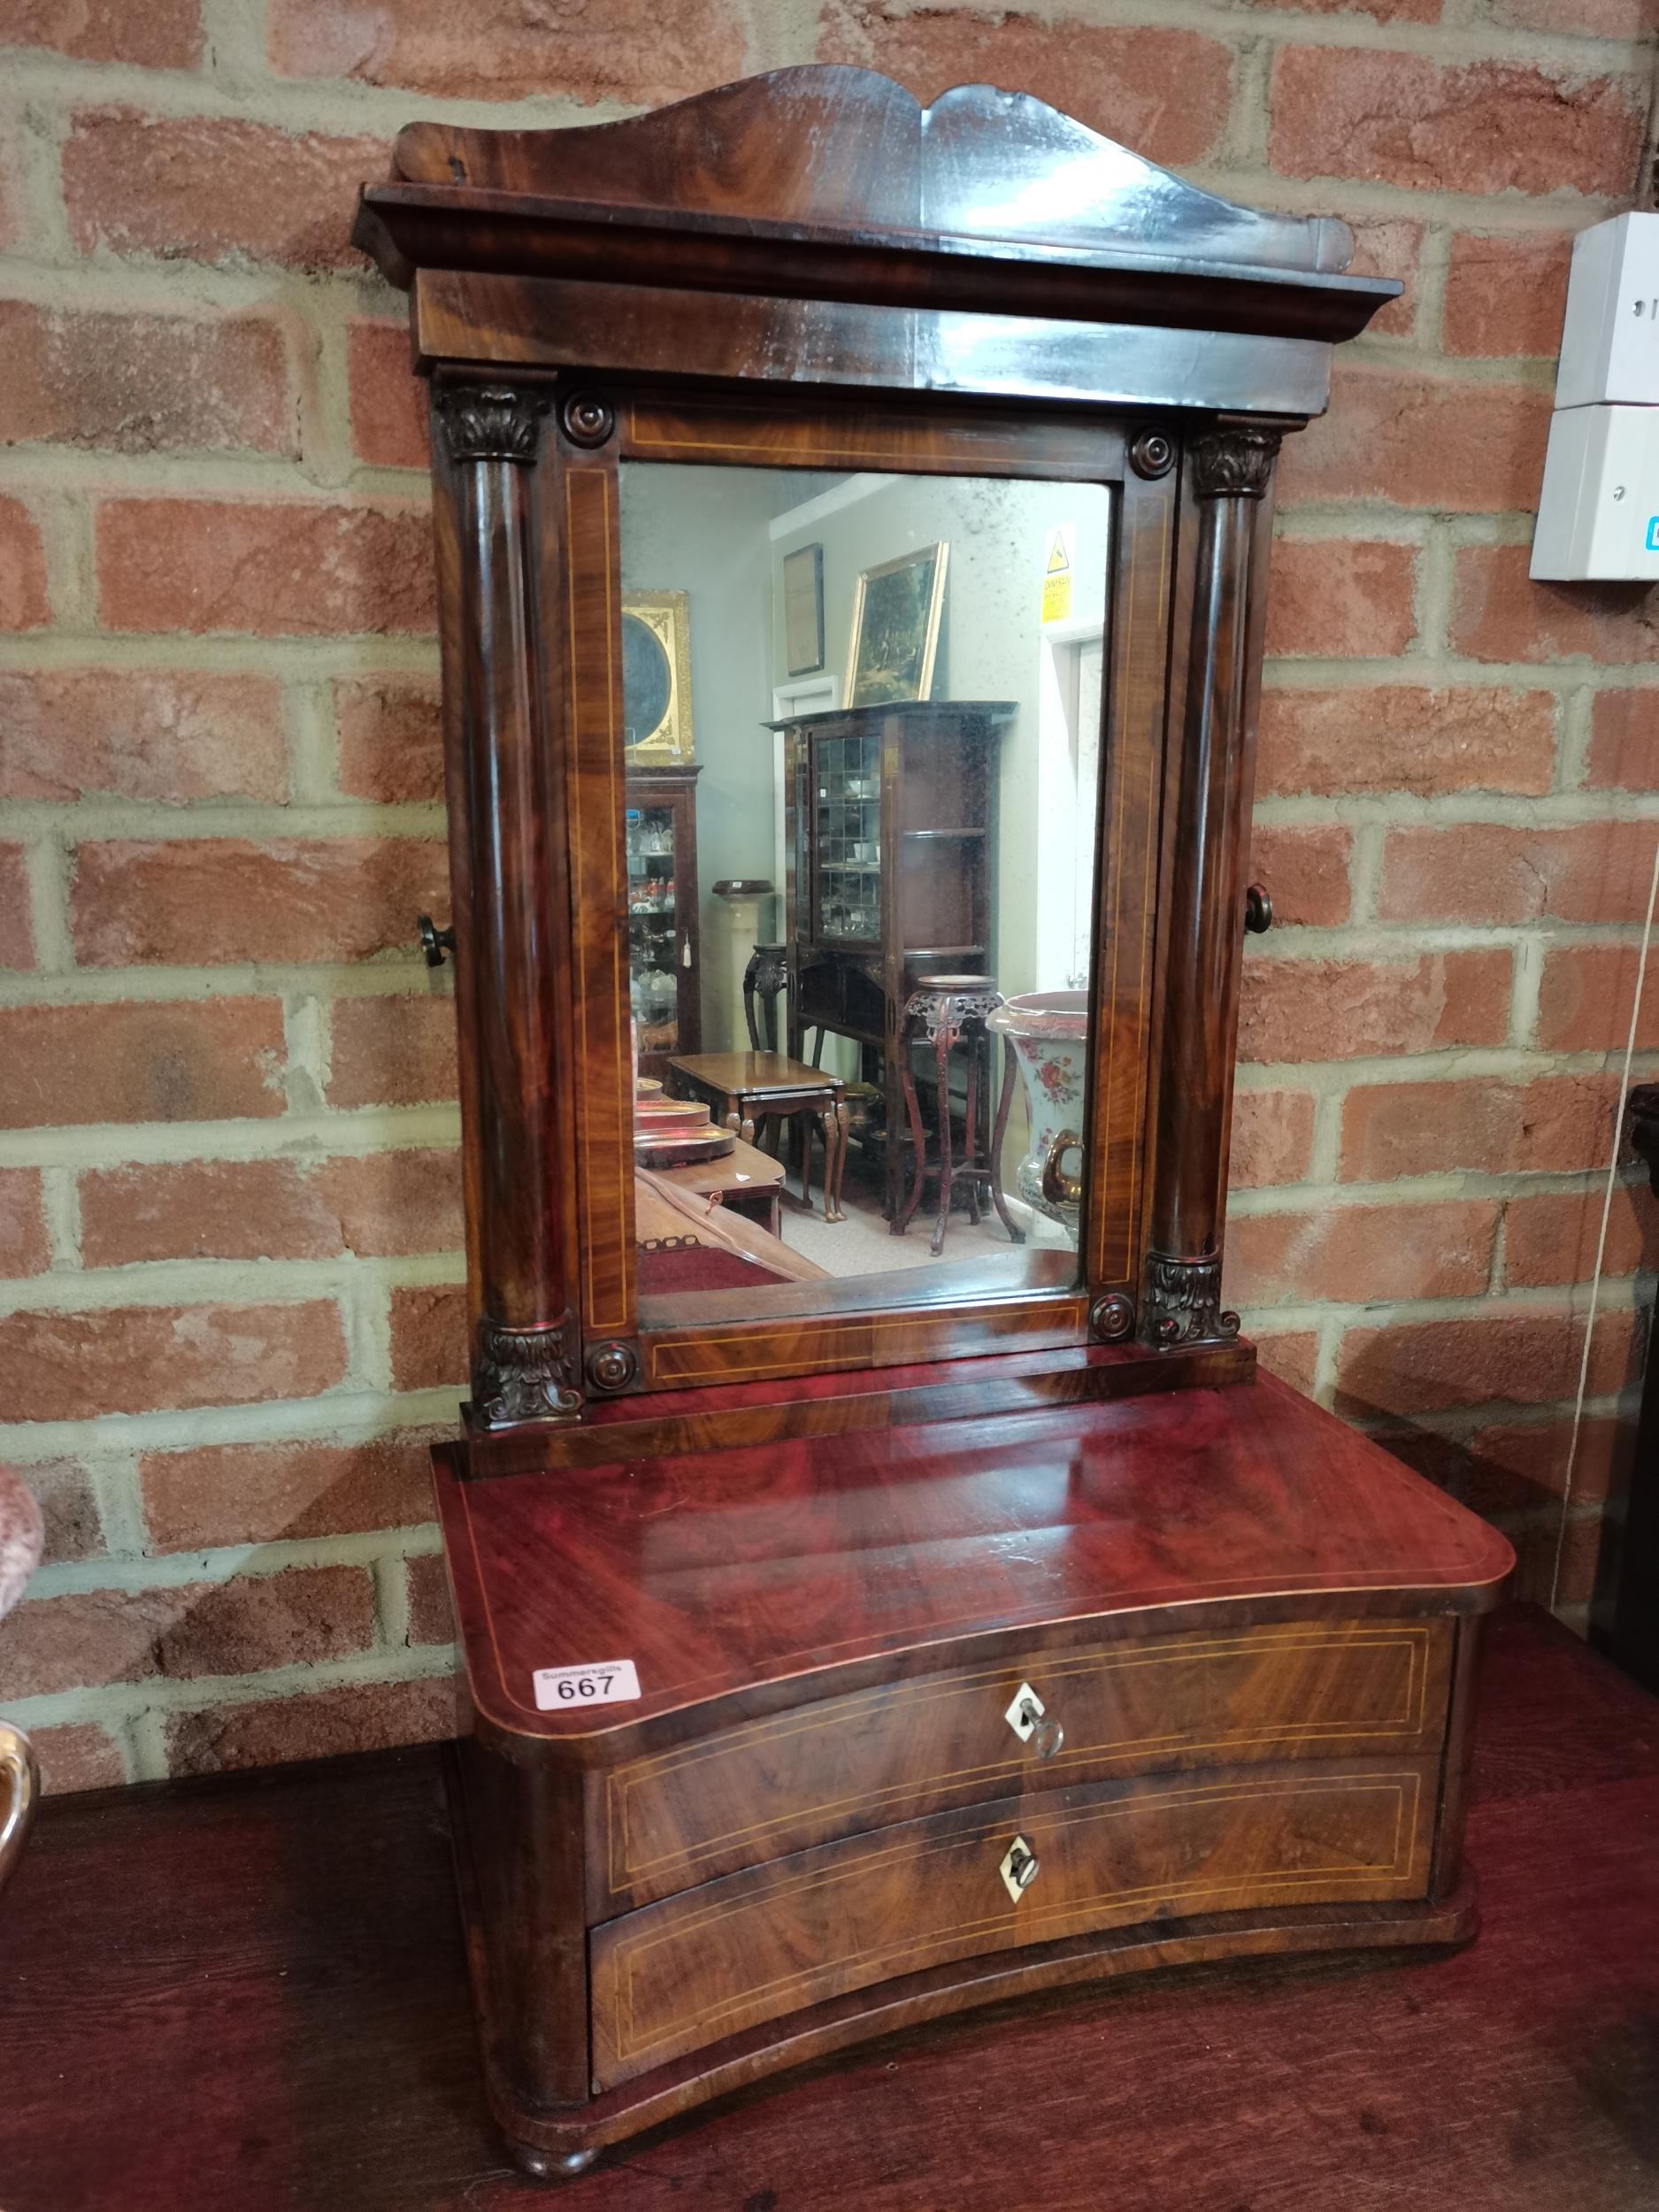 George III dressing table mirror with original glass and keys for drawers